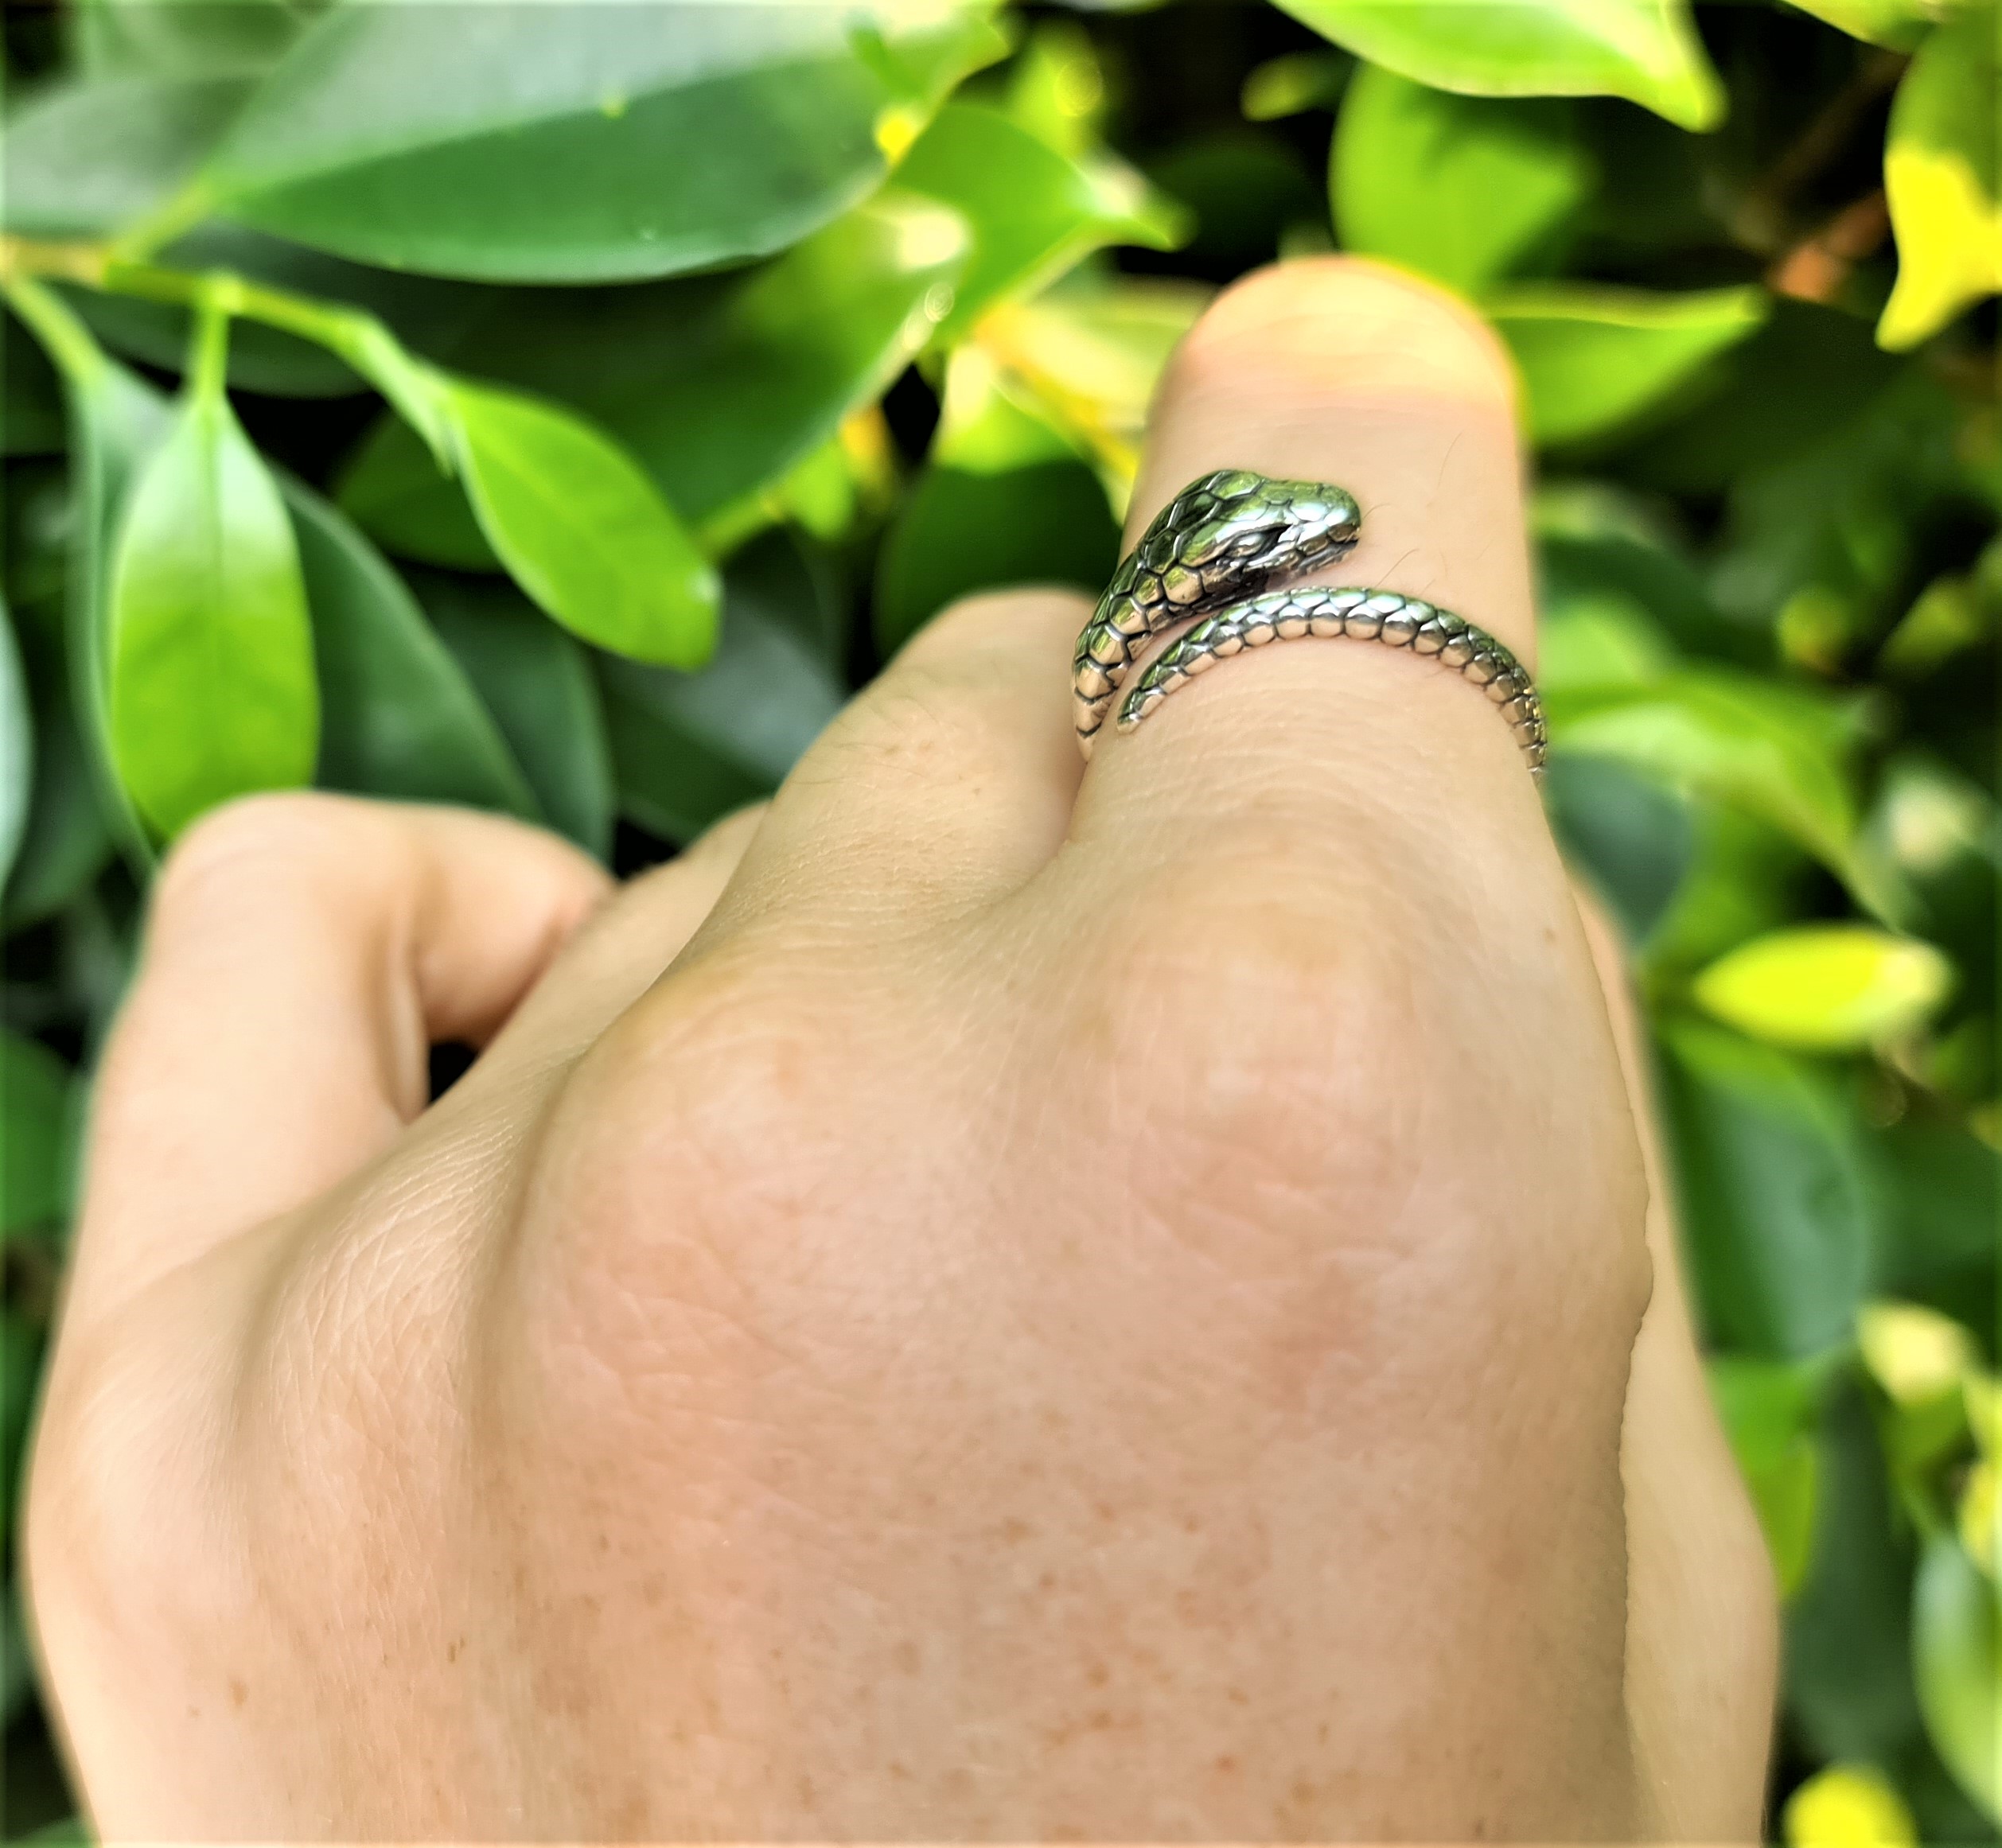 Silver Snake Ring with Blue Zircon Gem, Vintage Serpent Ring, Punk Animal  Ring Dainty Adjustable Open Ring Gift for Women Girls - Brass -  GetNameNecklace